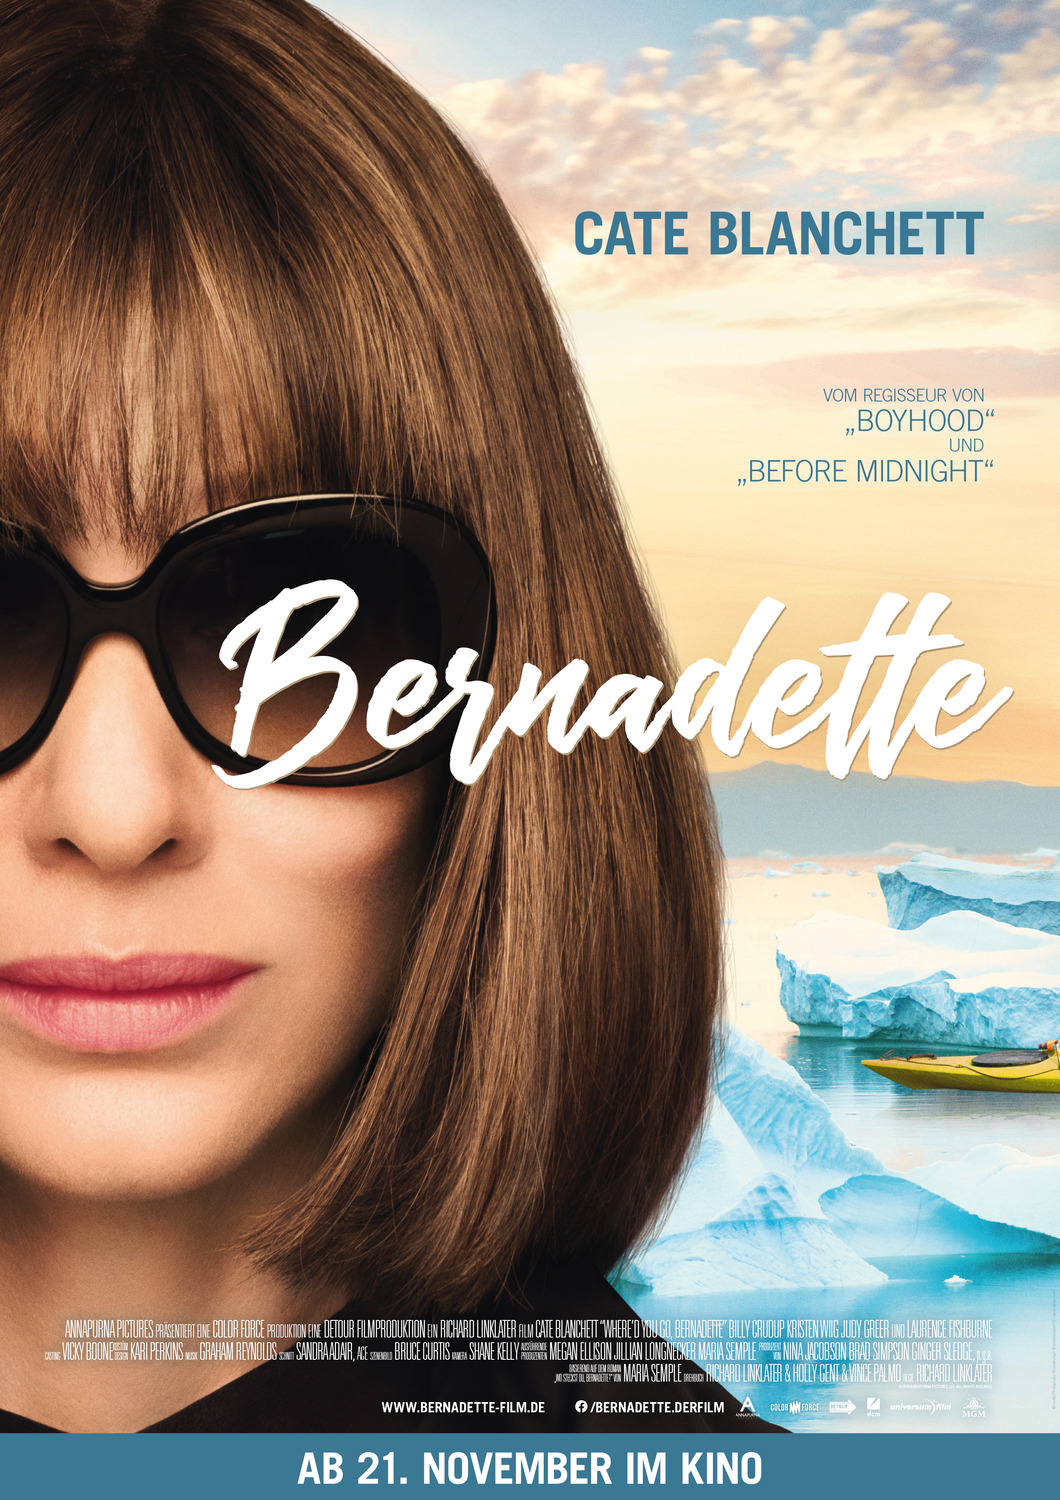 Extra Large Movie Poster Image for Where'd You Go, Bernadette (#4 of 4)